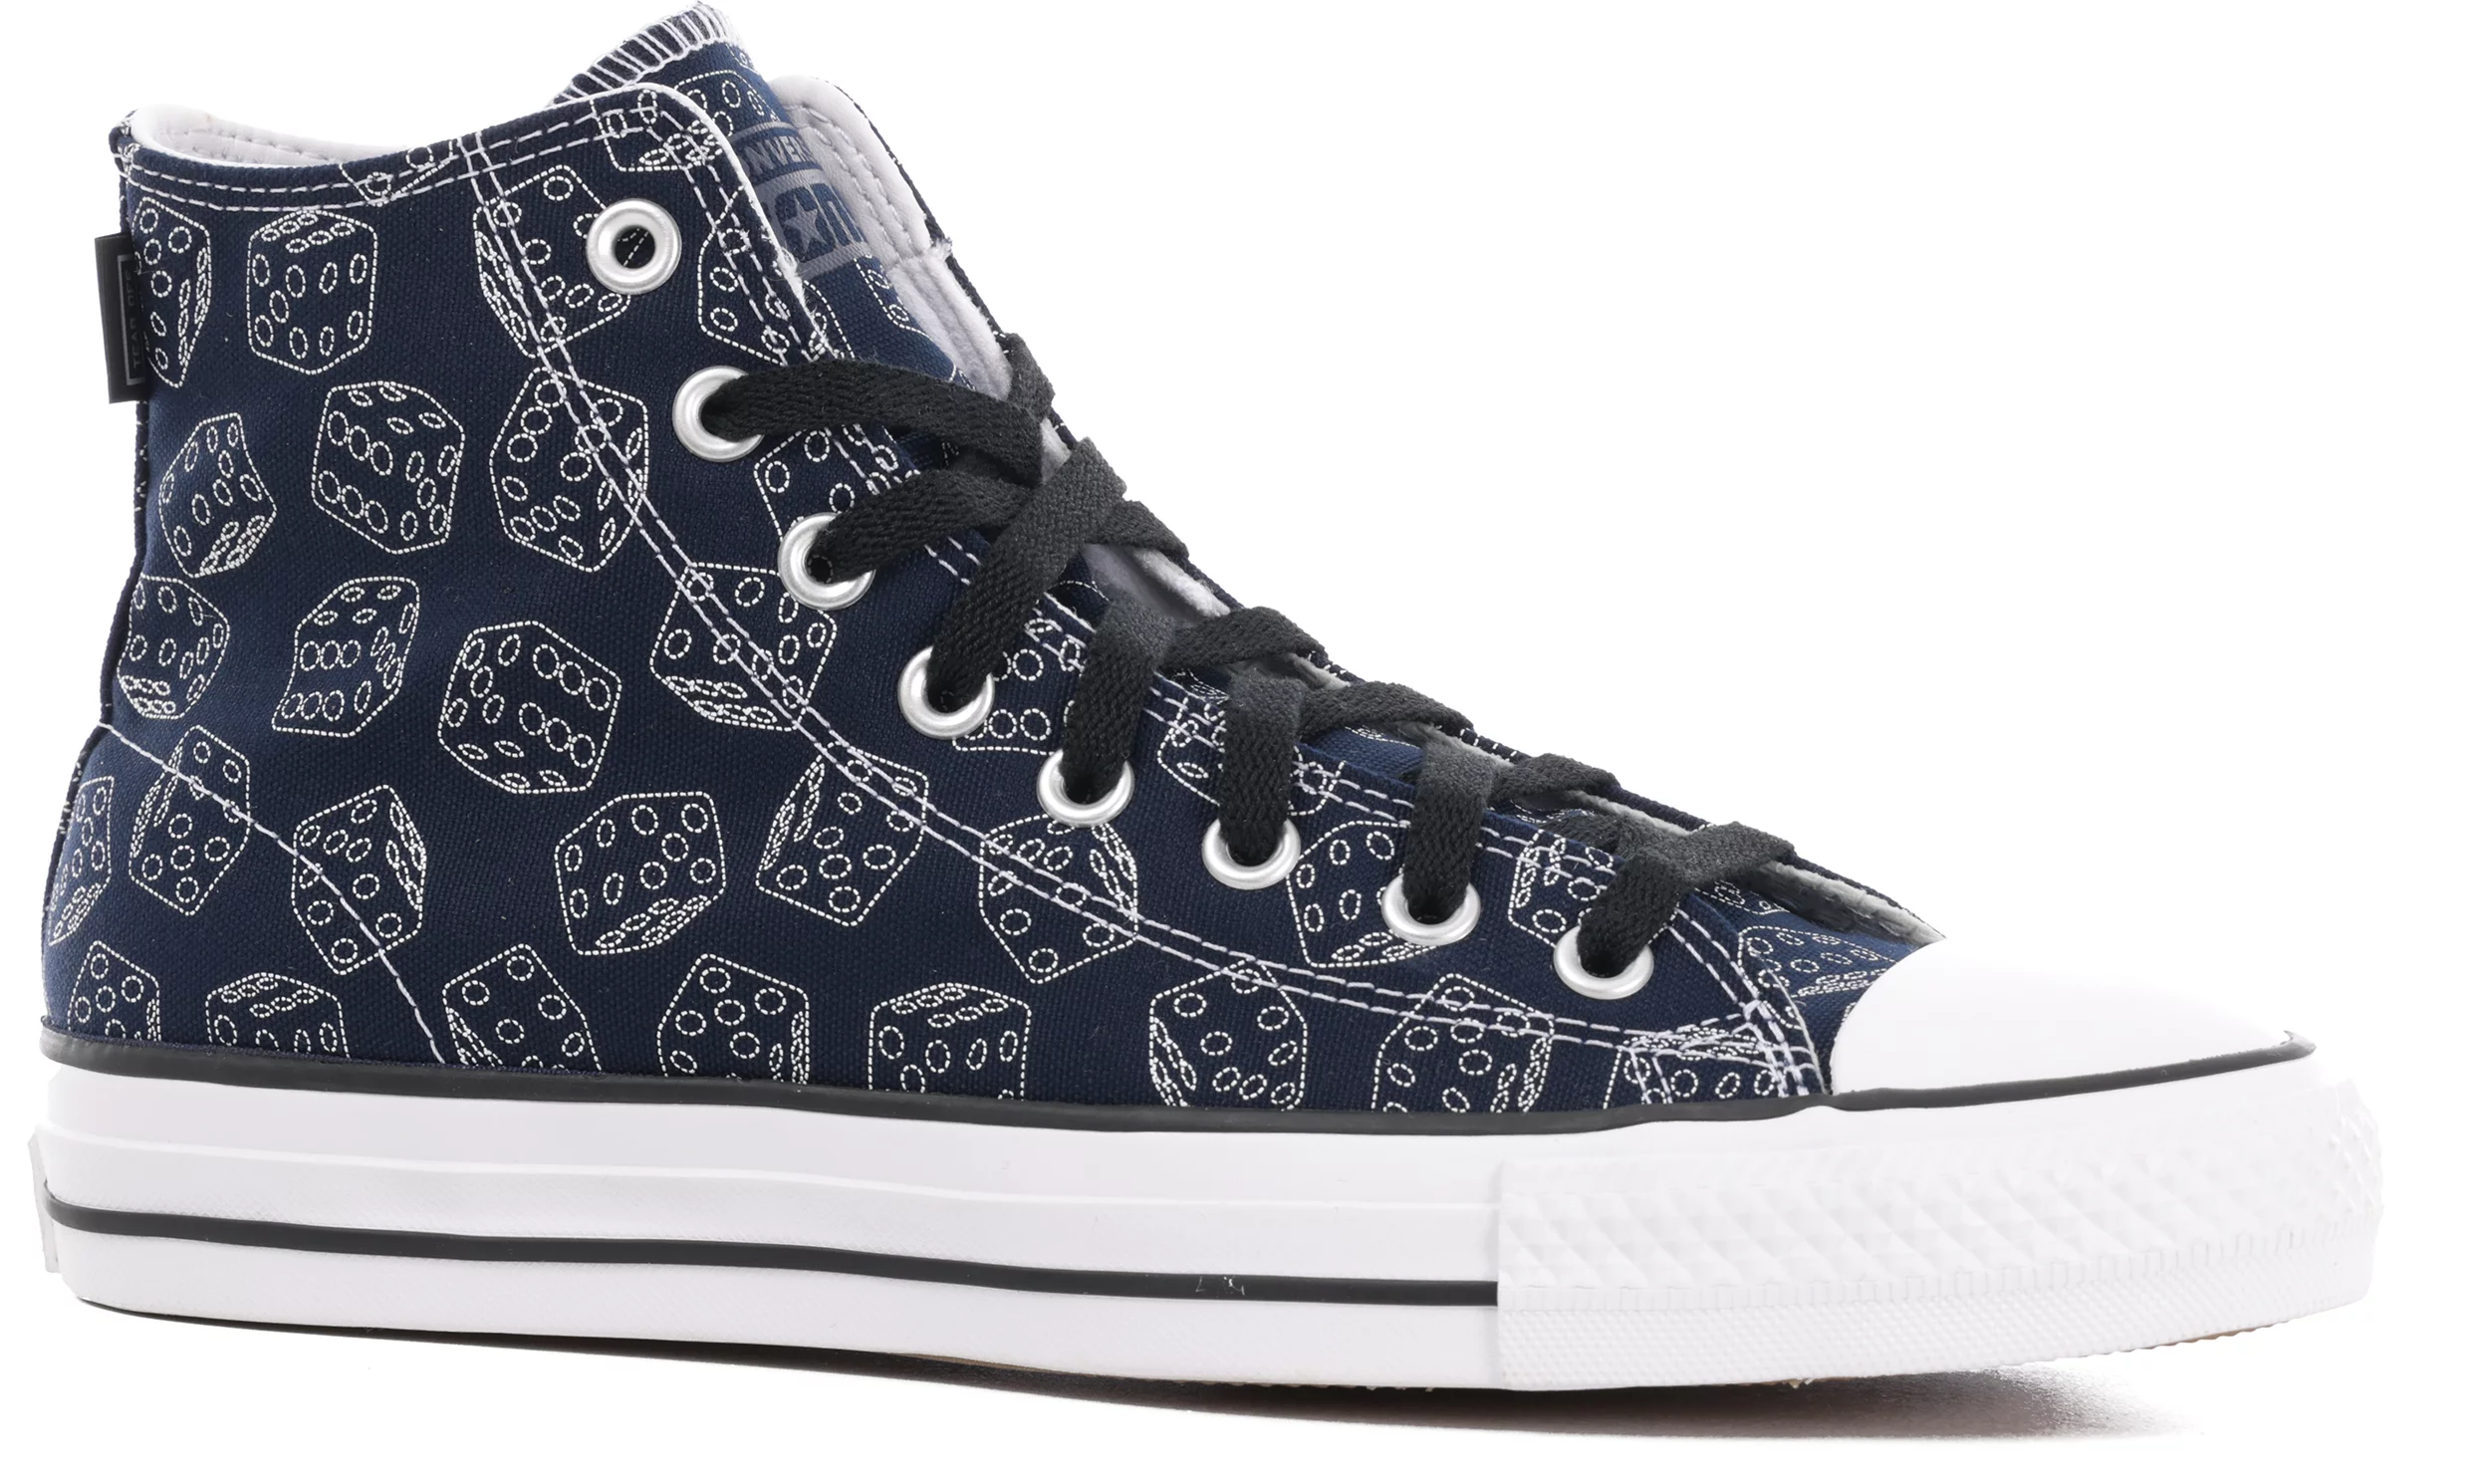 Chuck Taylor All Pro High Skate Shoes - (dice obsidian/ black/white |